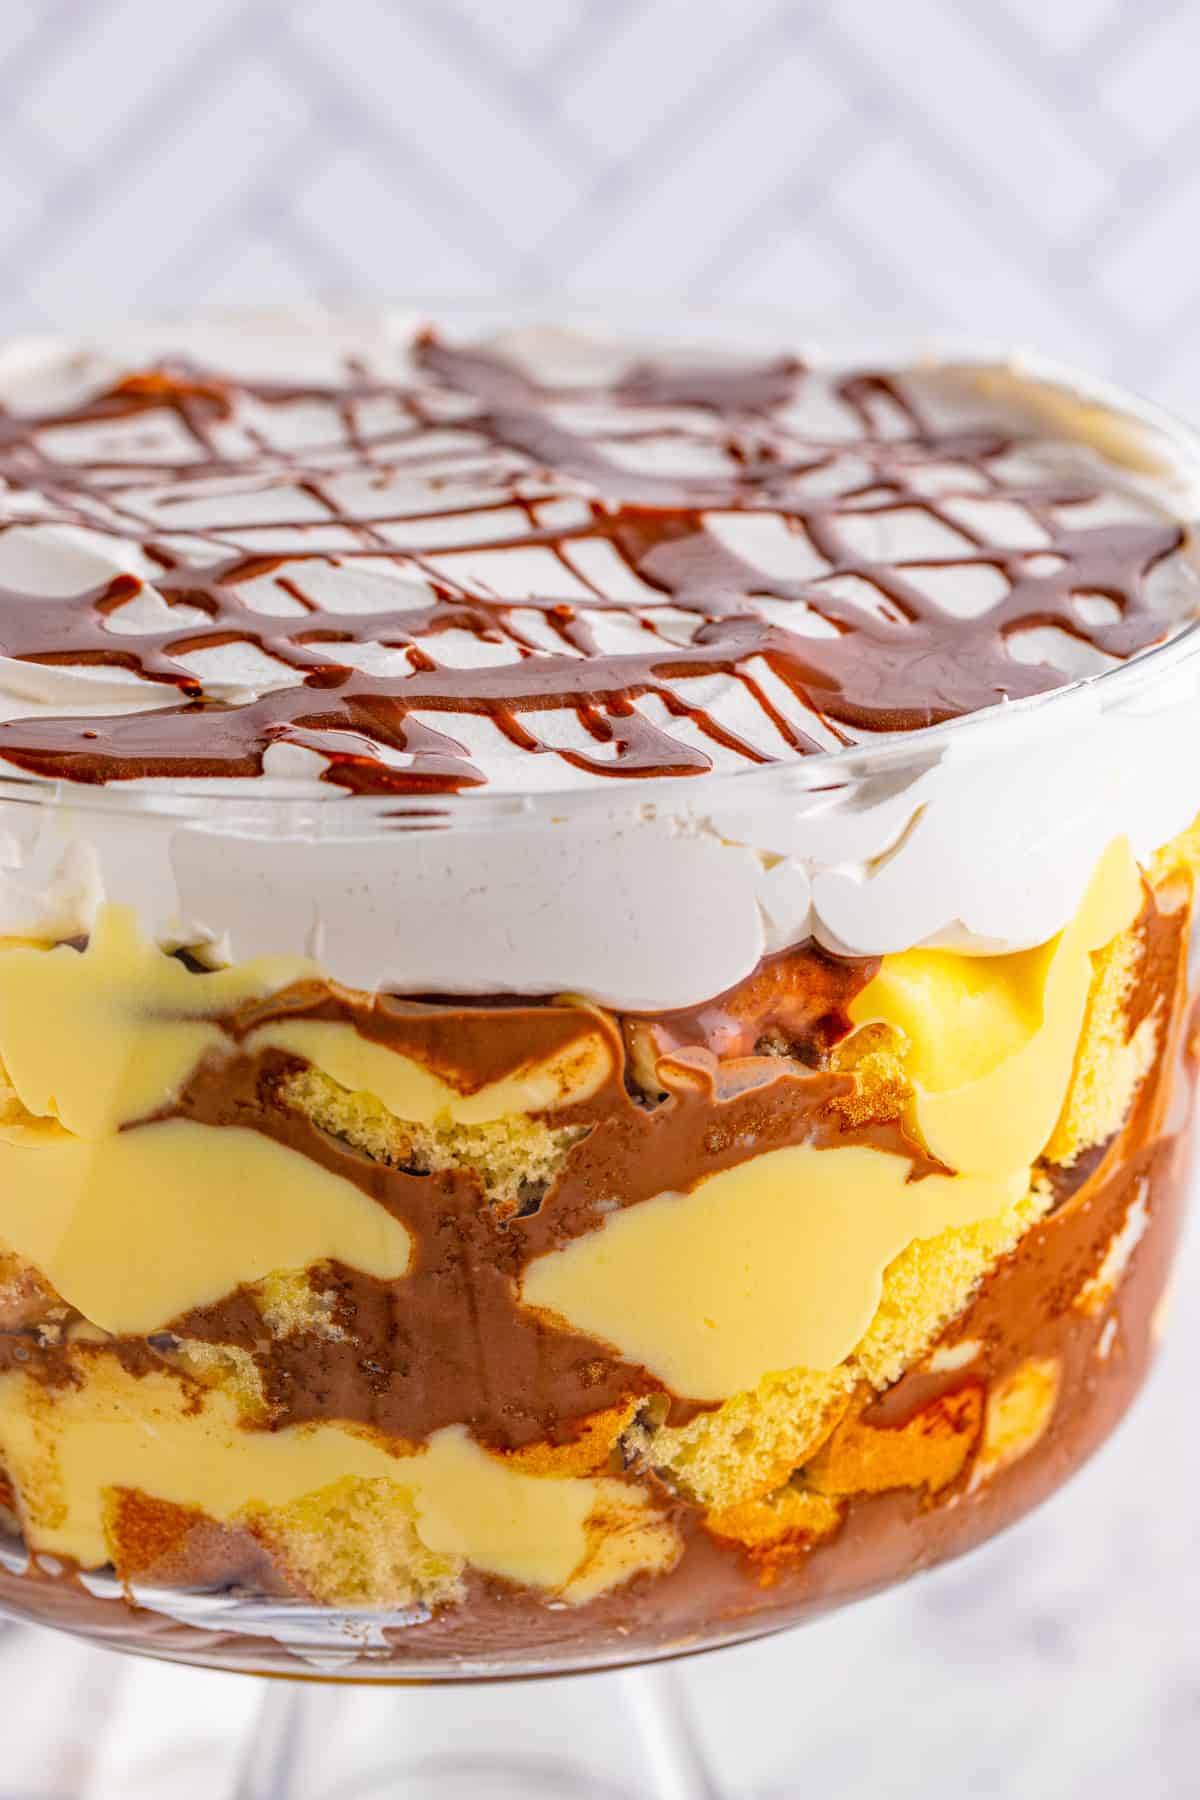 Close up of finished trifle in trifle bowl showing layers of cake, pudding and chocolate topped with whipped topping.